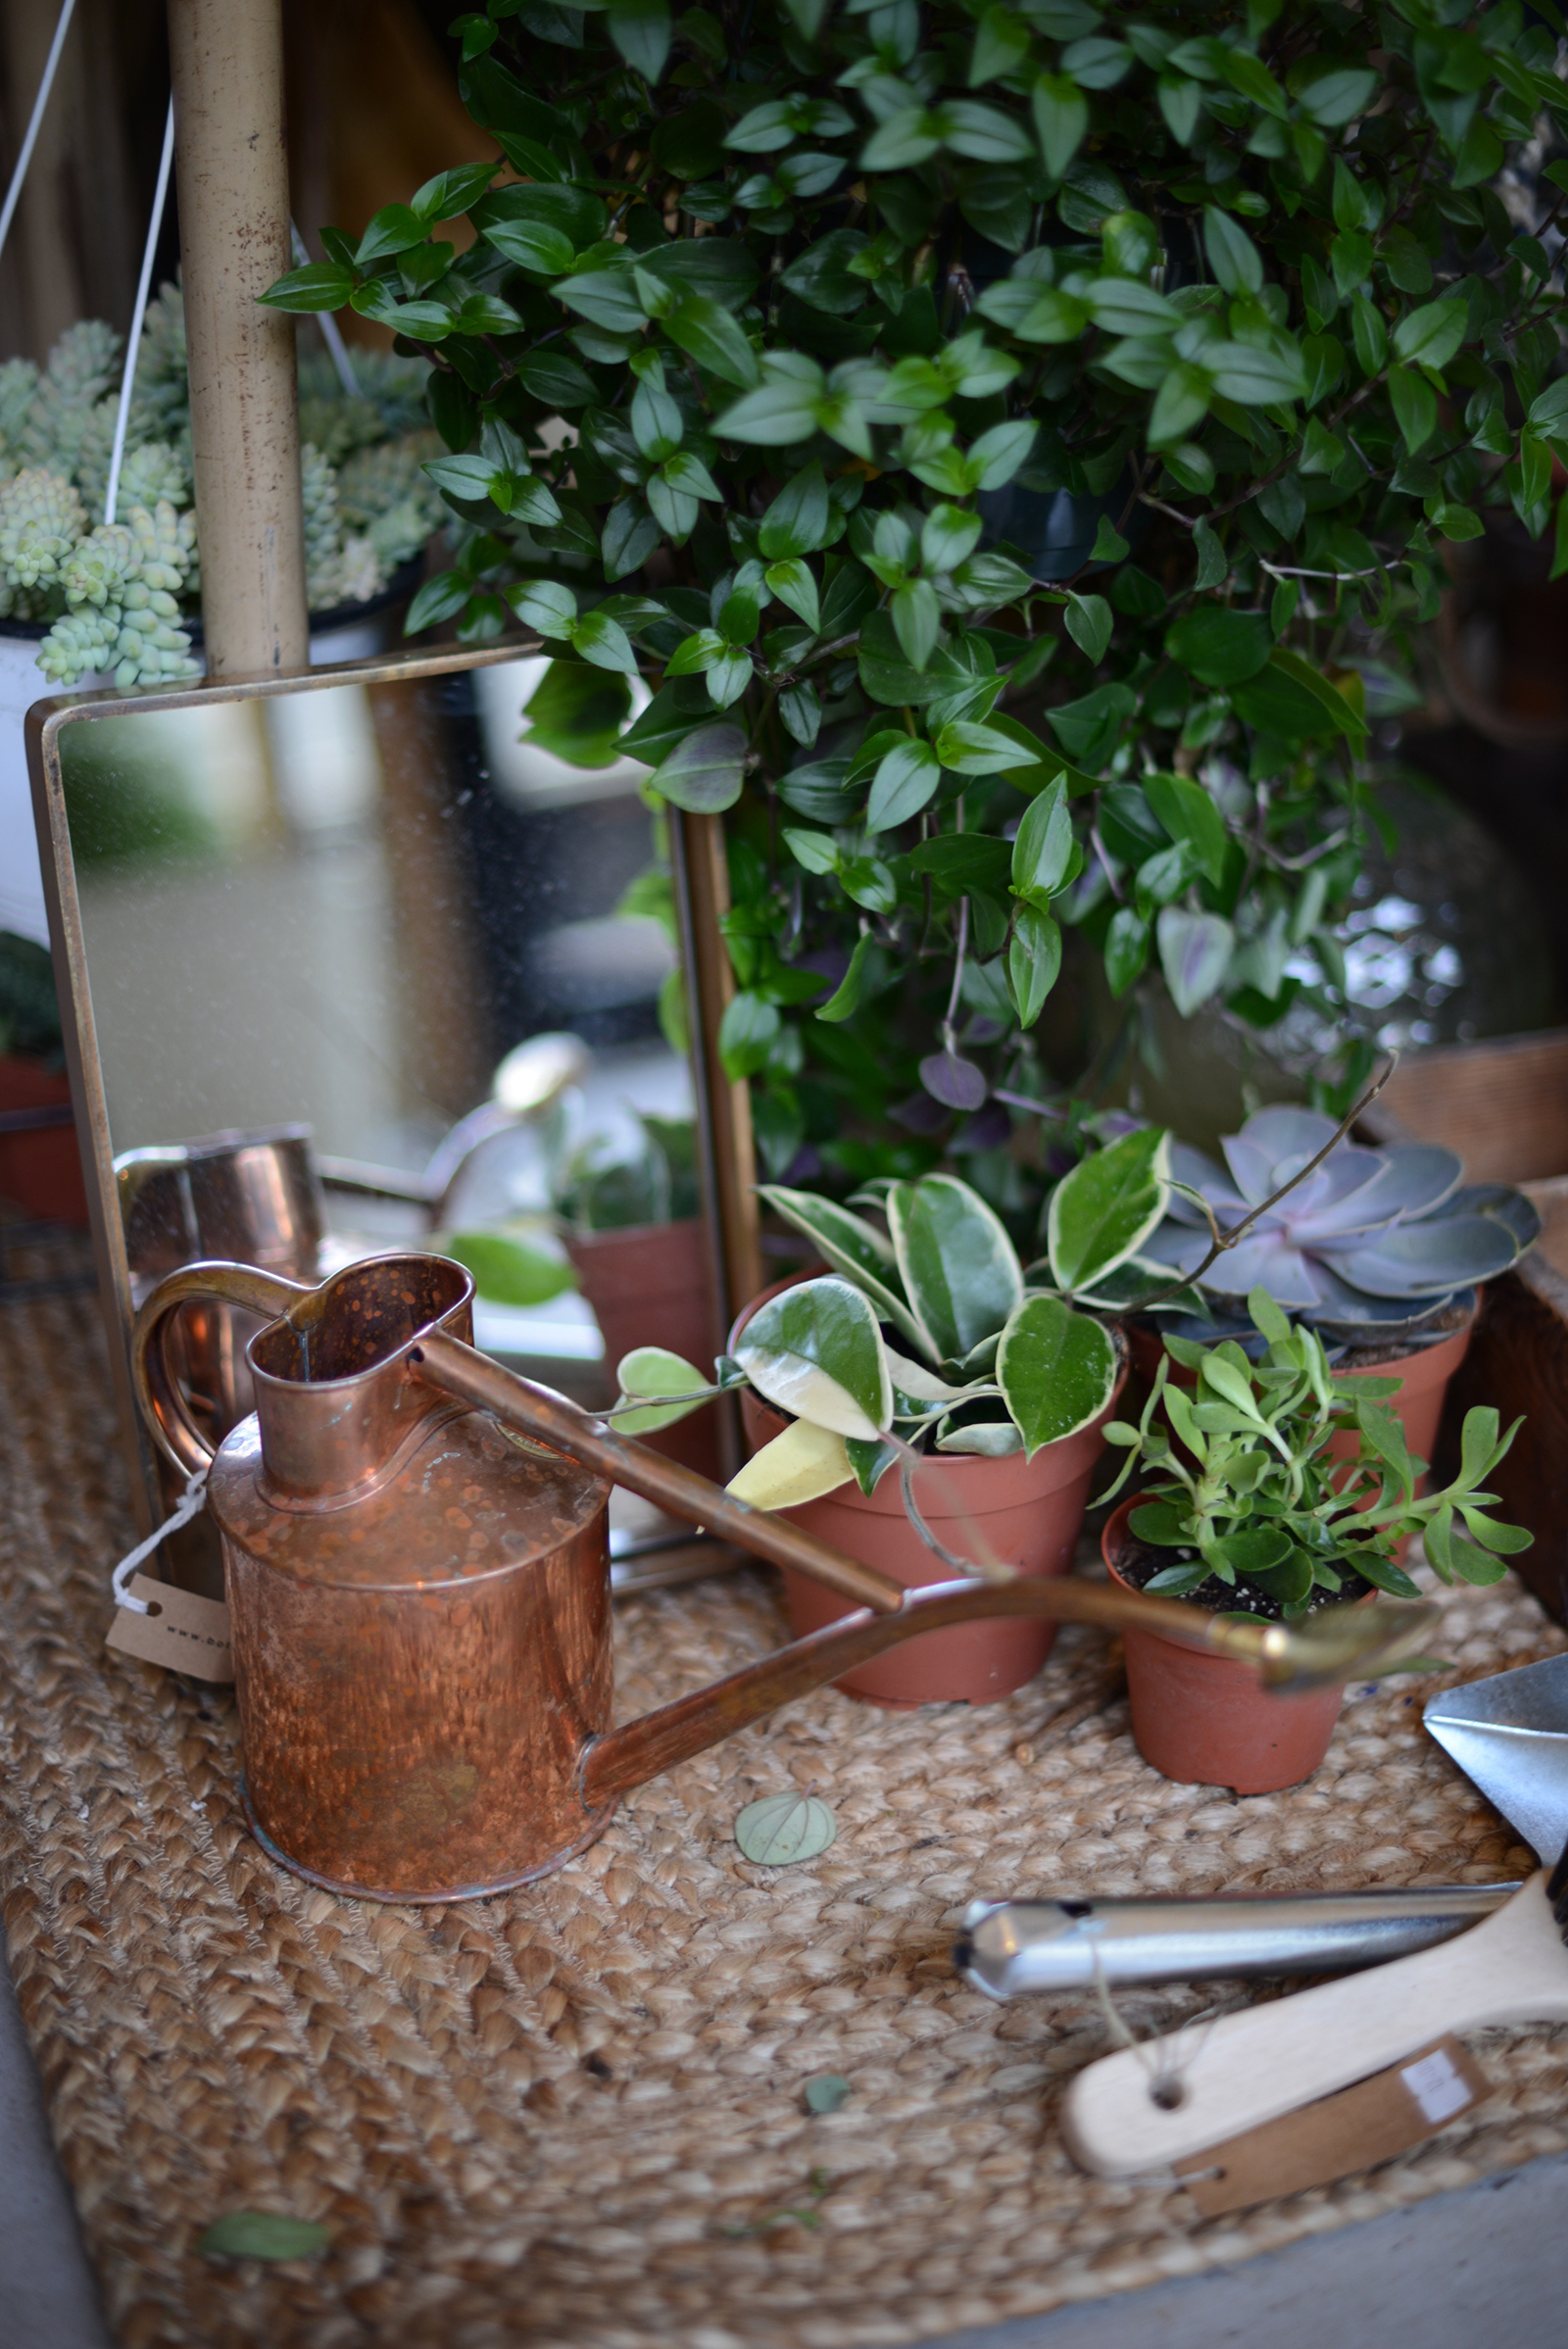 clapton shopping guide with lifestyle bloggers sara delaney and julia rebaudo featuring plant store botany on Chatsworth road